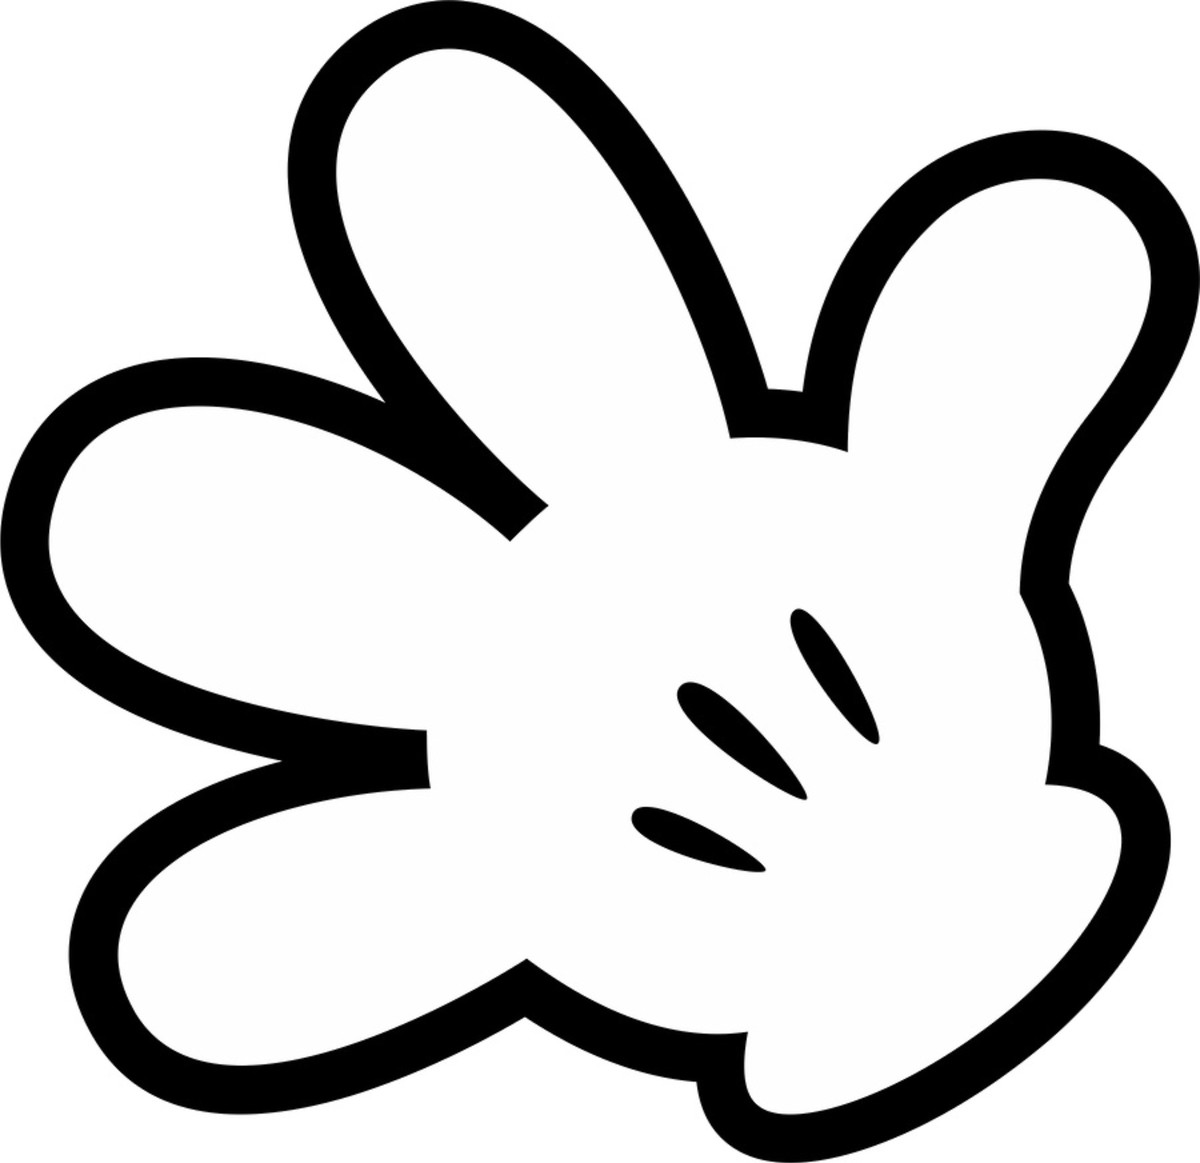 5 Best Images of Mickey Mouse Hand Printable - Mickey Mouse Gloves ...